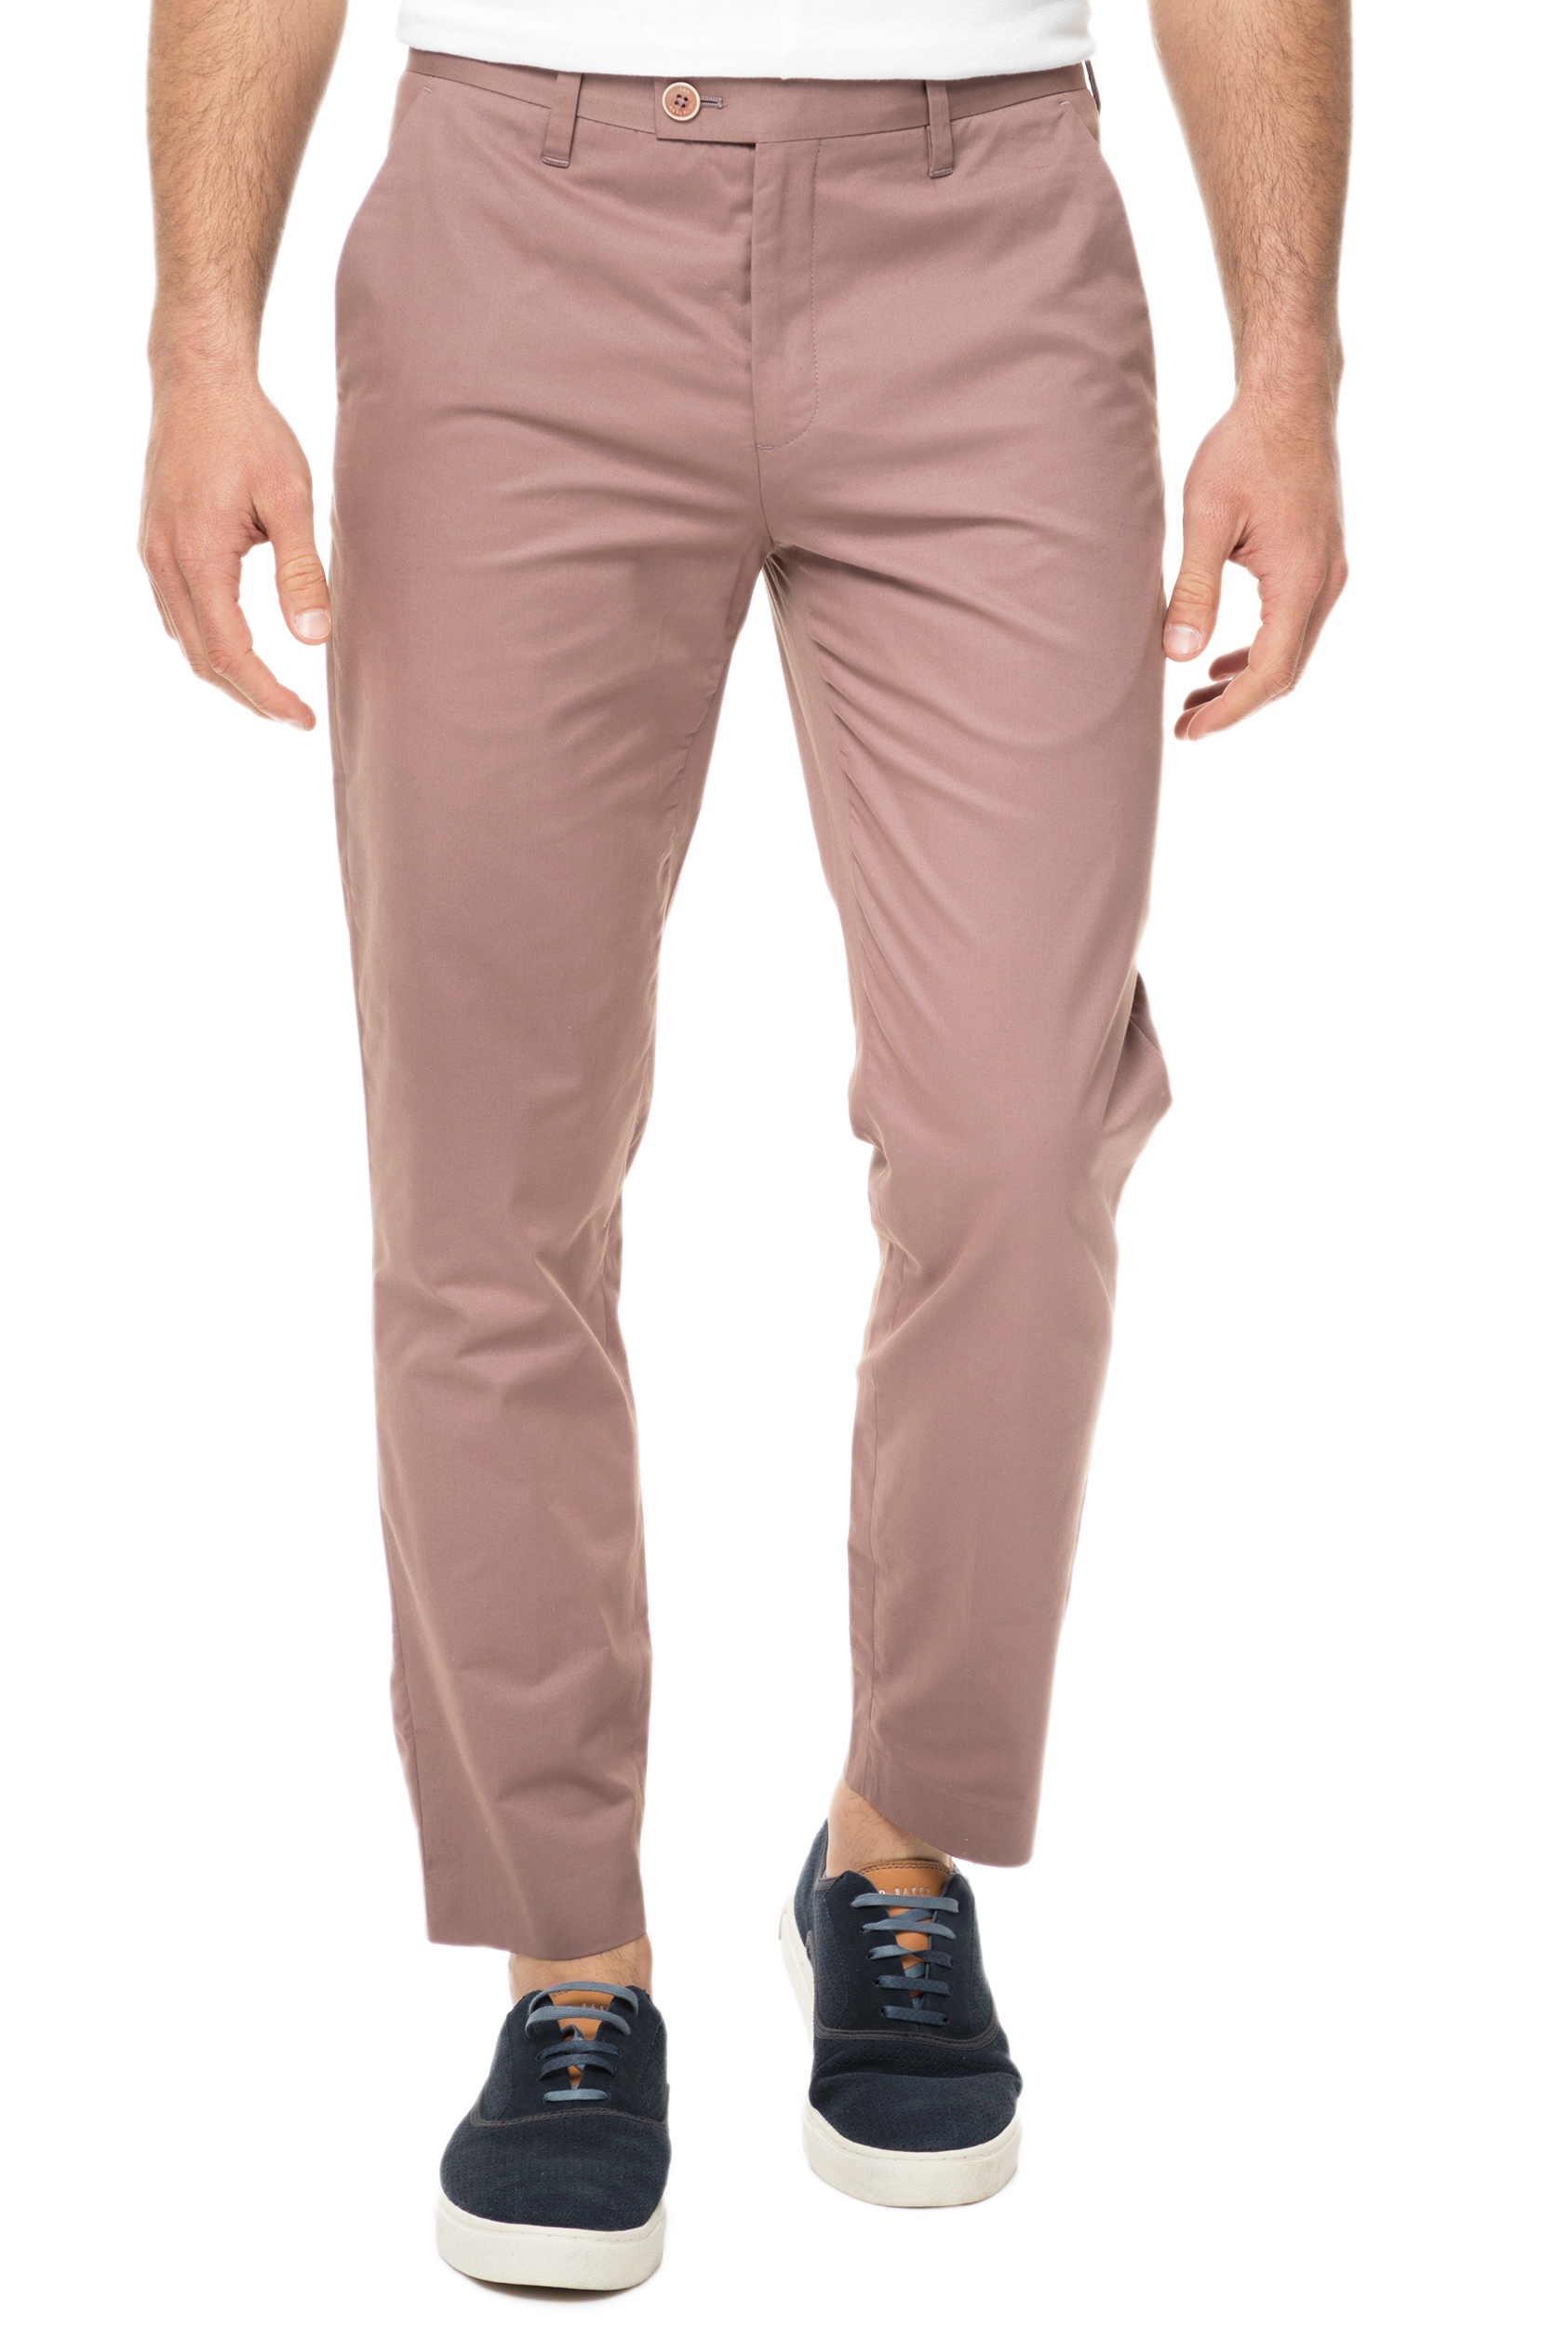 TED BAKER Ανδρικό chino παντελόνι TED BAKER CLIFTRO σάπιο μήλο